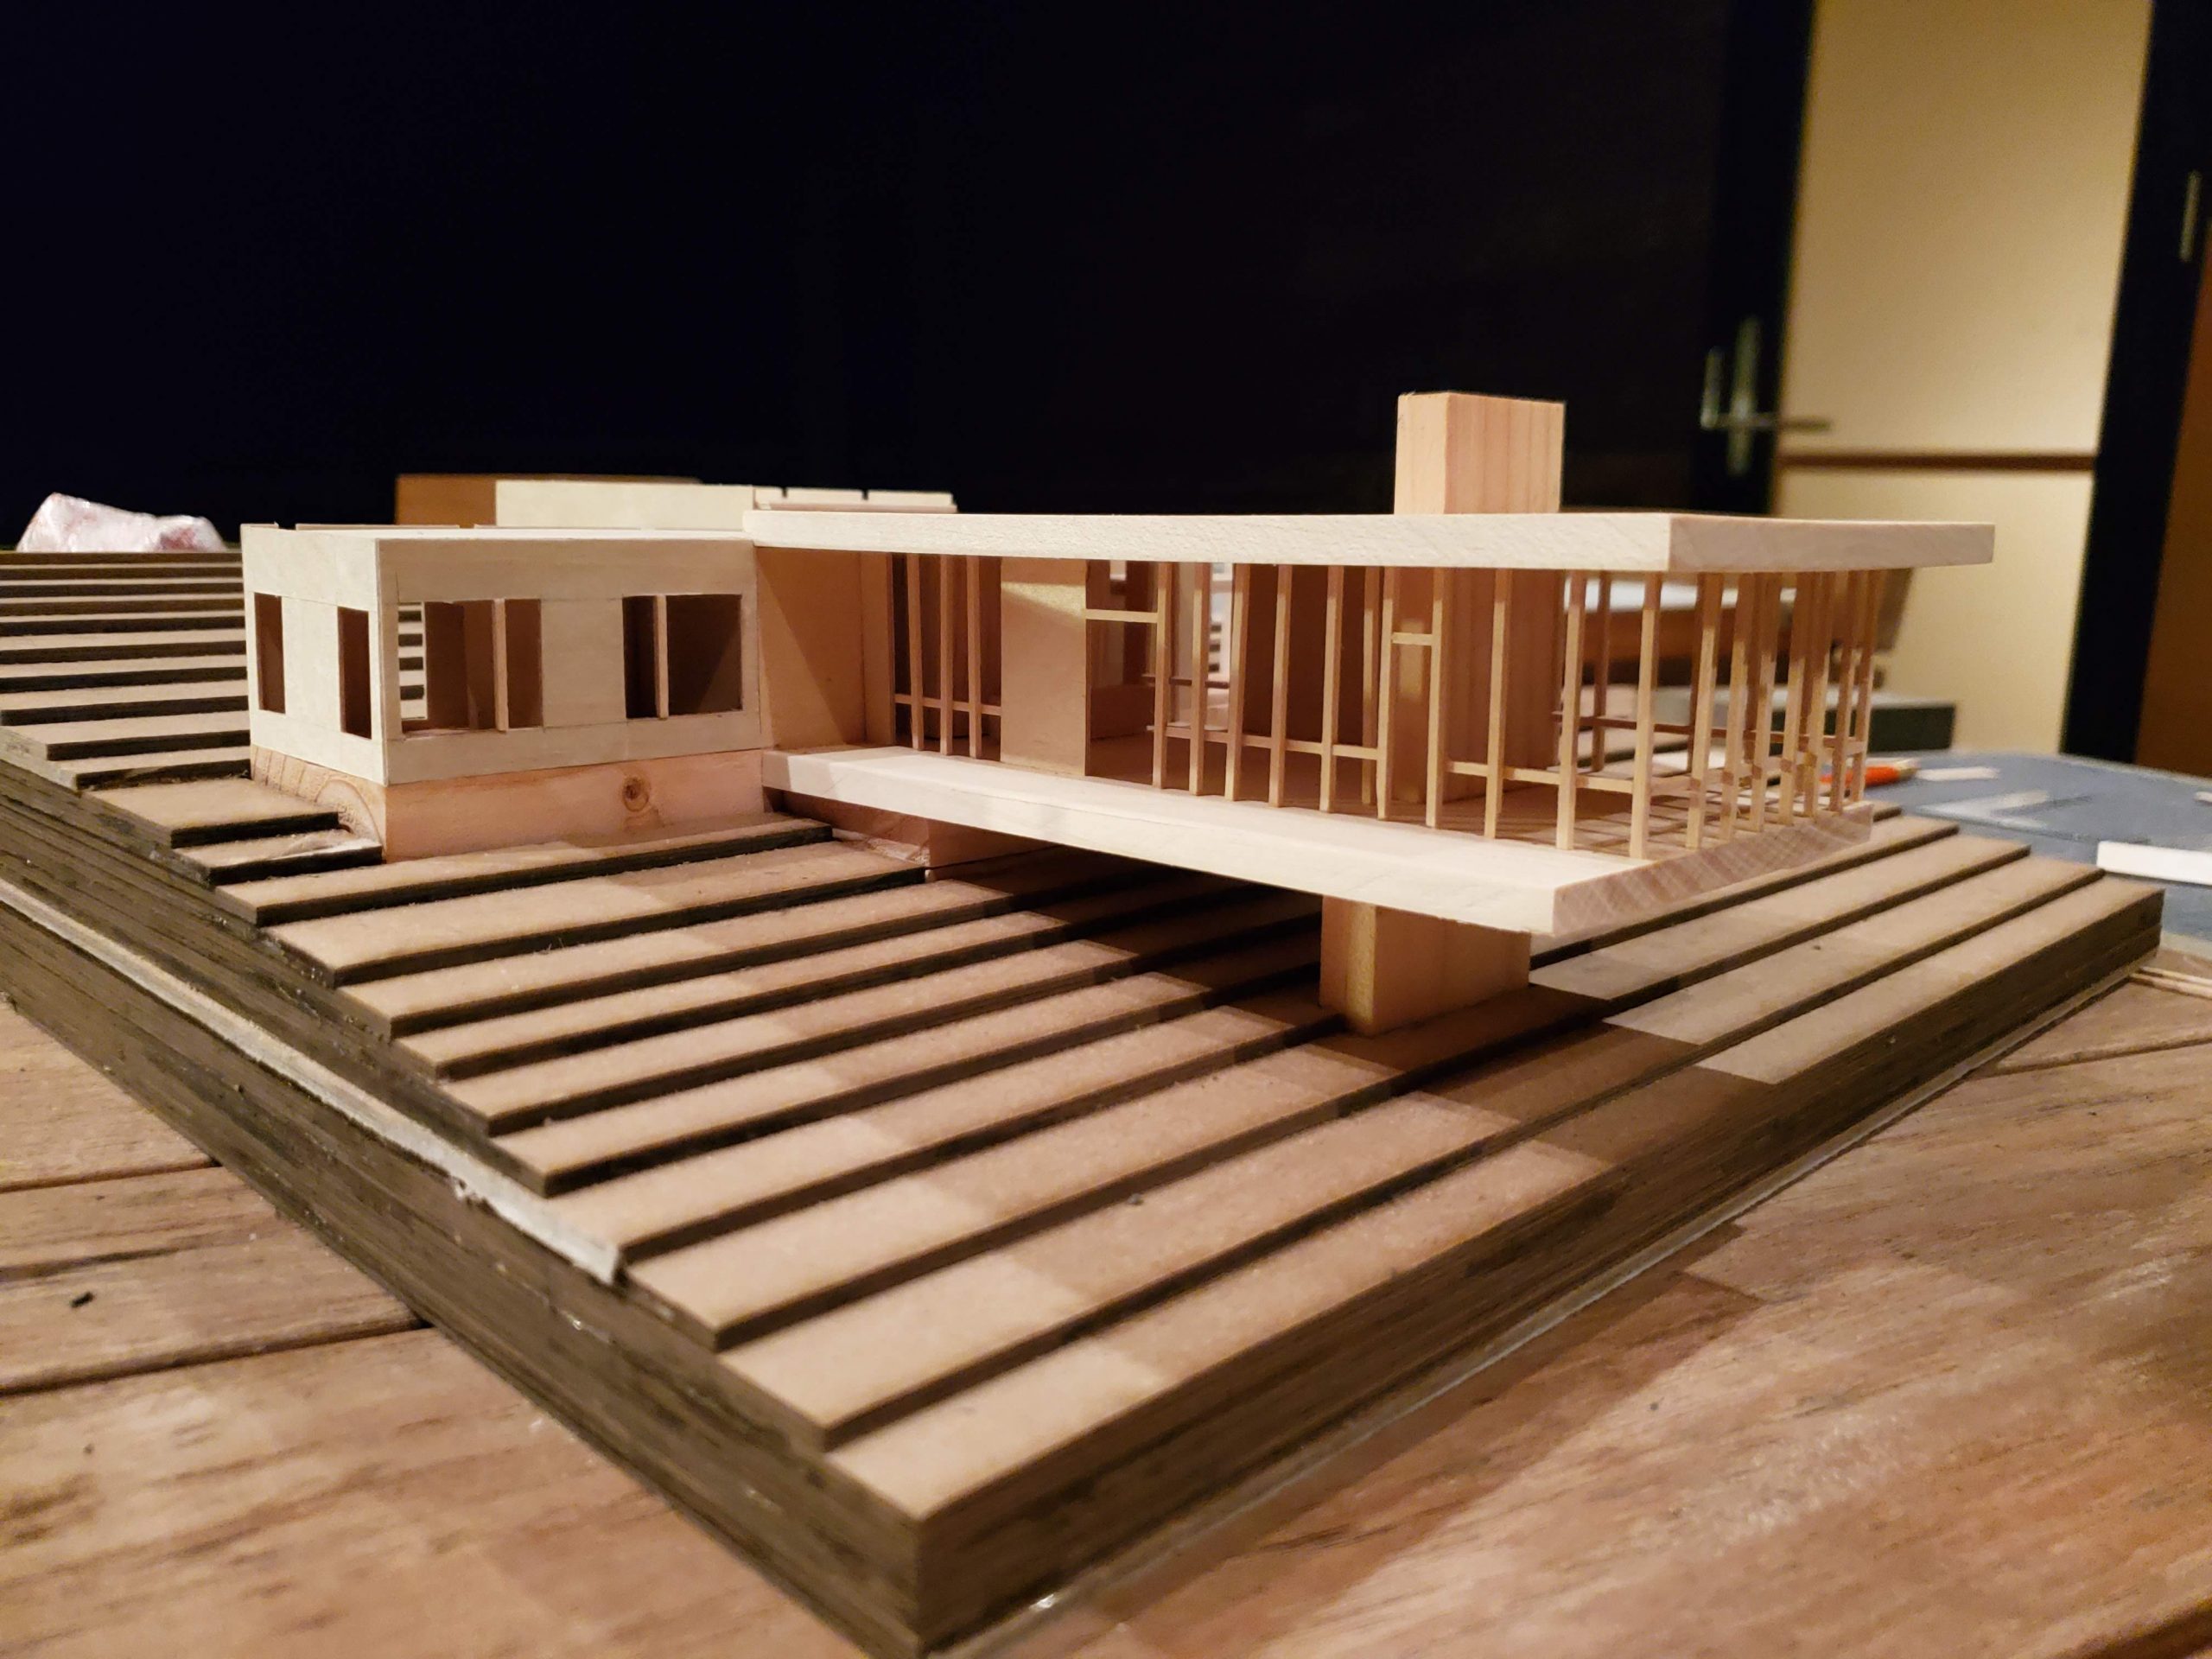 Architectural Model - Modern Residential Architecture - Studio MM Architect